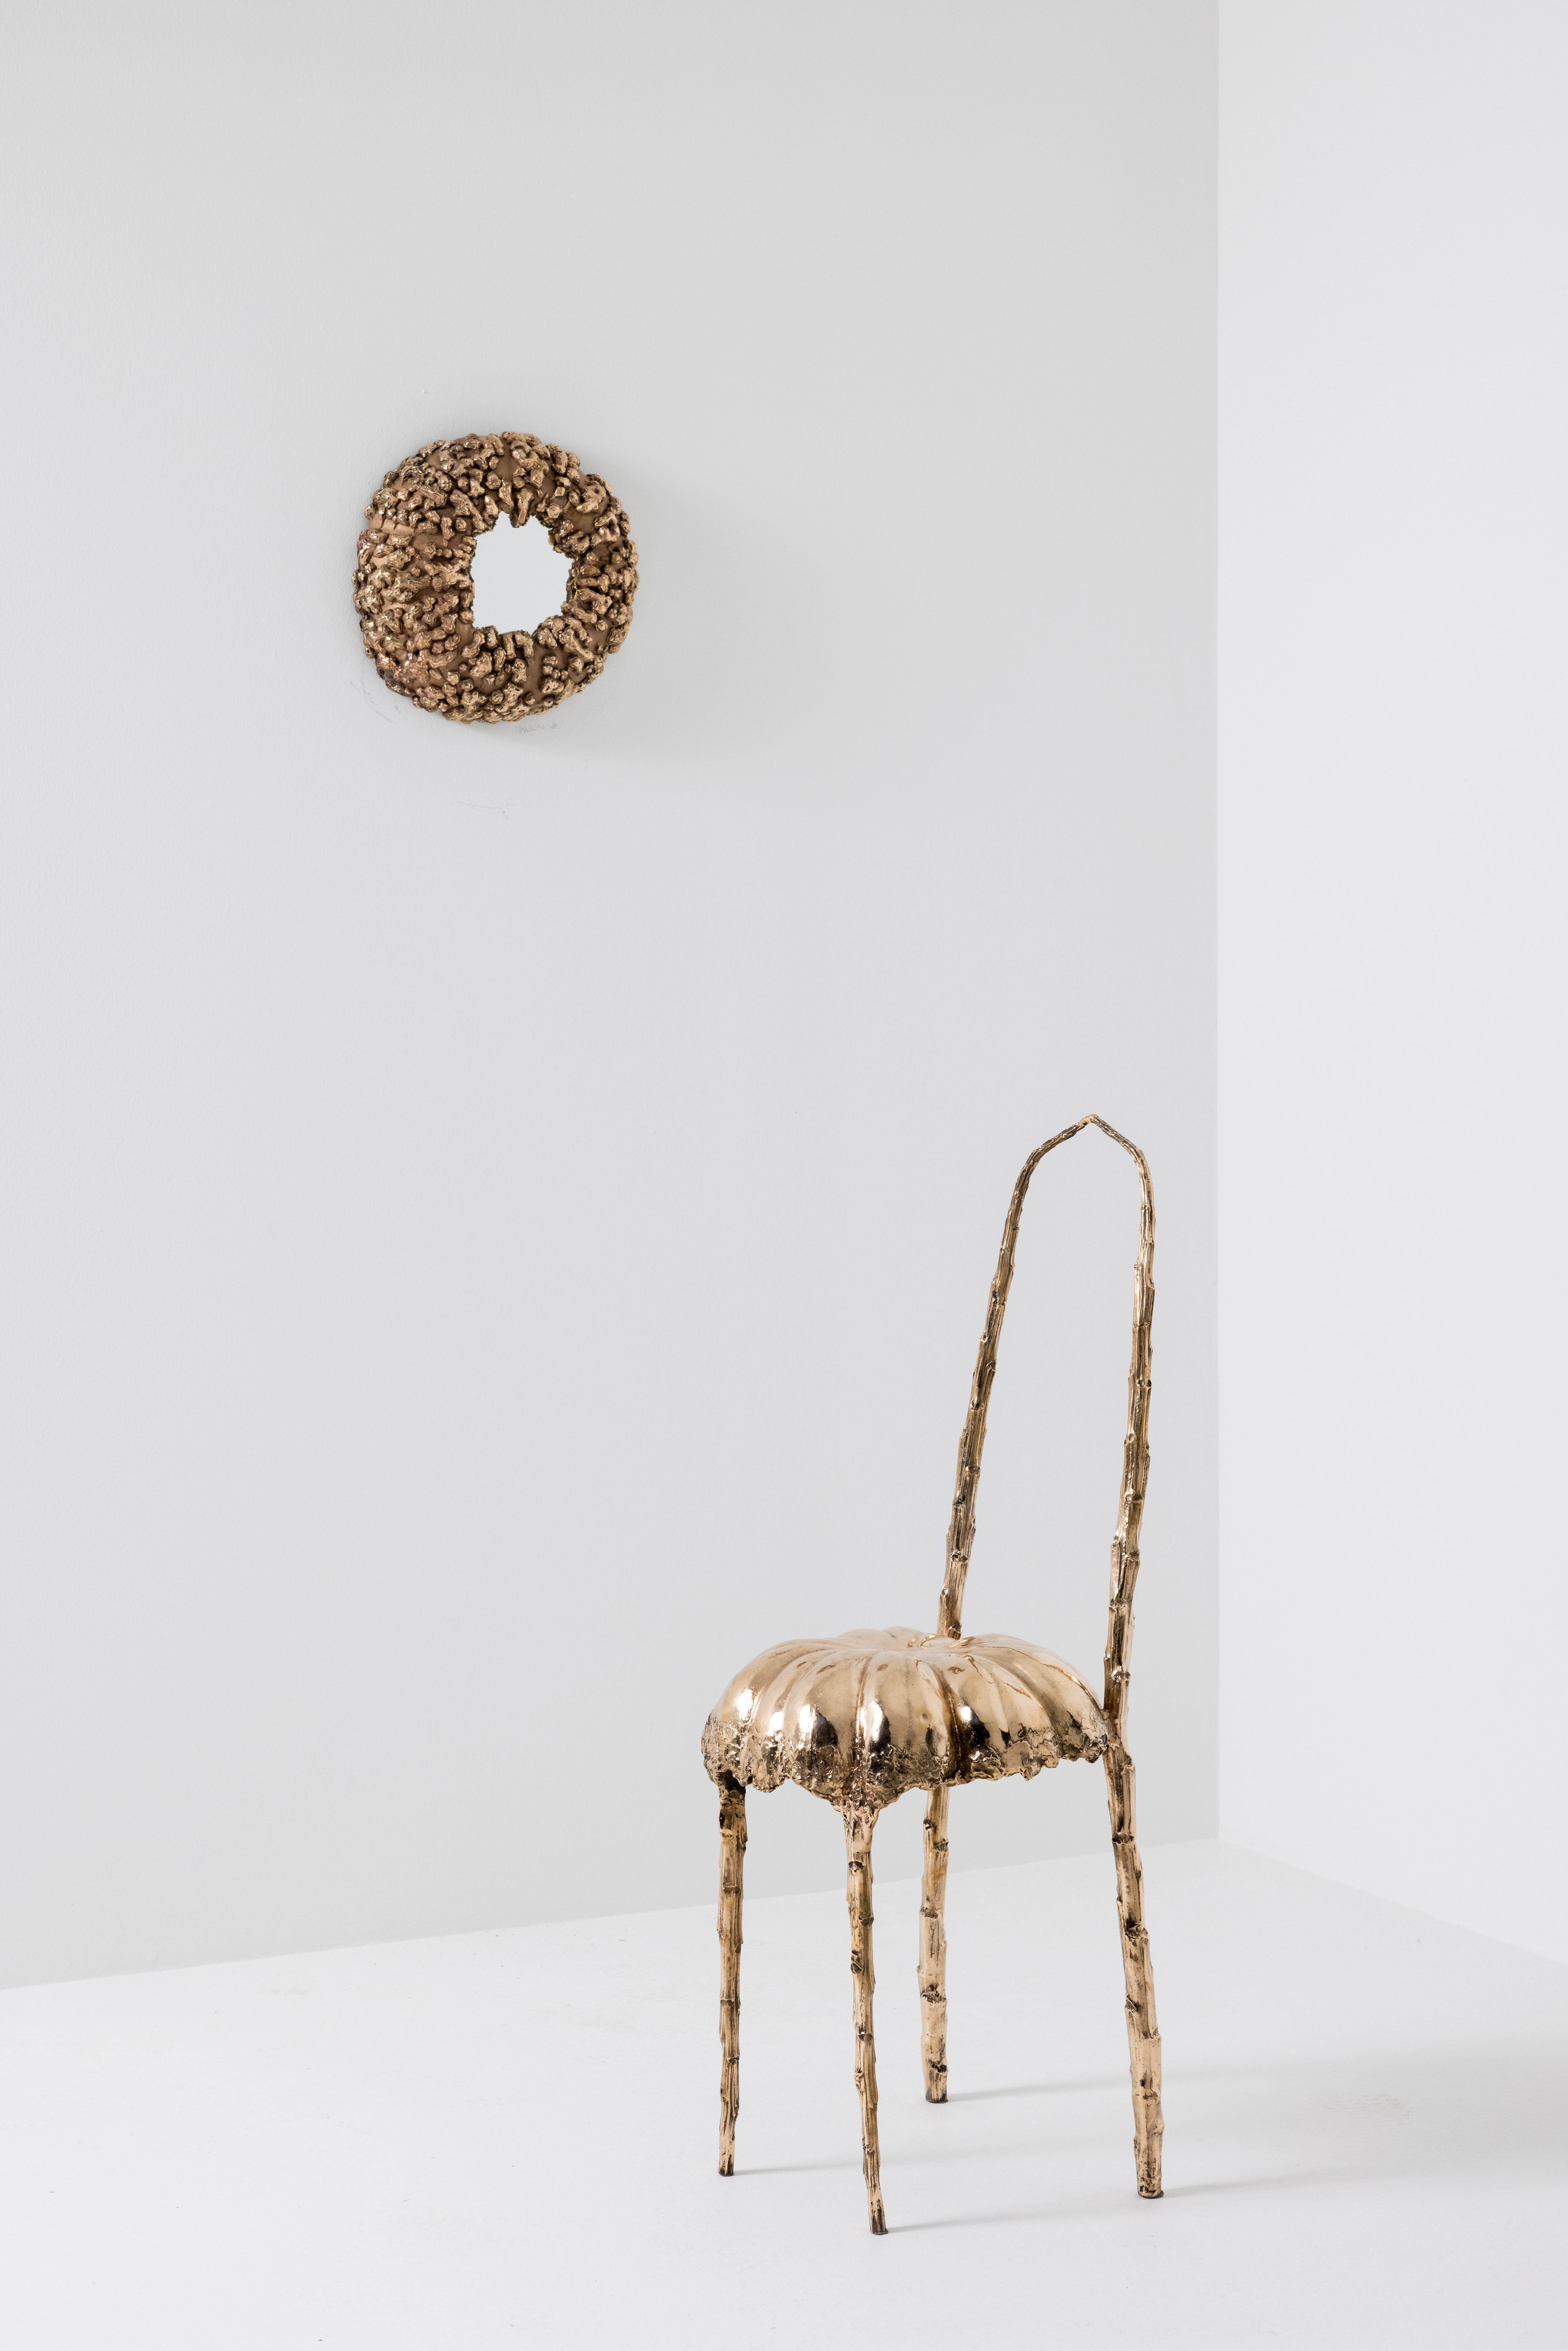 “Jellyfish” chair by Clotilde Ancarani 
Material: Bronze, golden polish
Dimensions: H 80 x Ø 38 cm
Year: 2023

The “Jellyfish” bronze chair by Clotilde Ancarani is moulded and cast to simulate the organic suppleness of natural elements combined